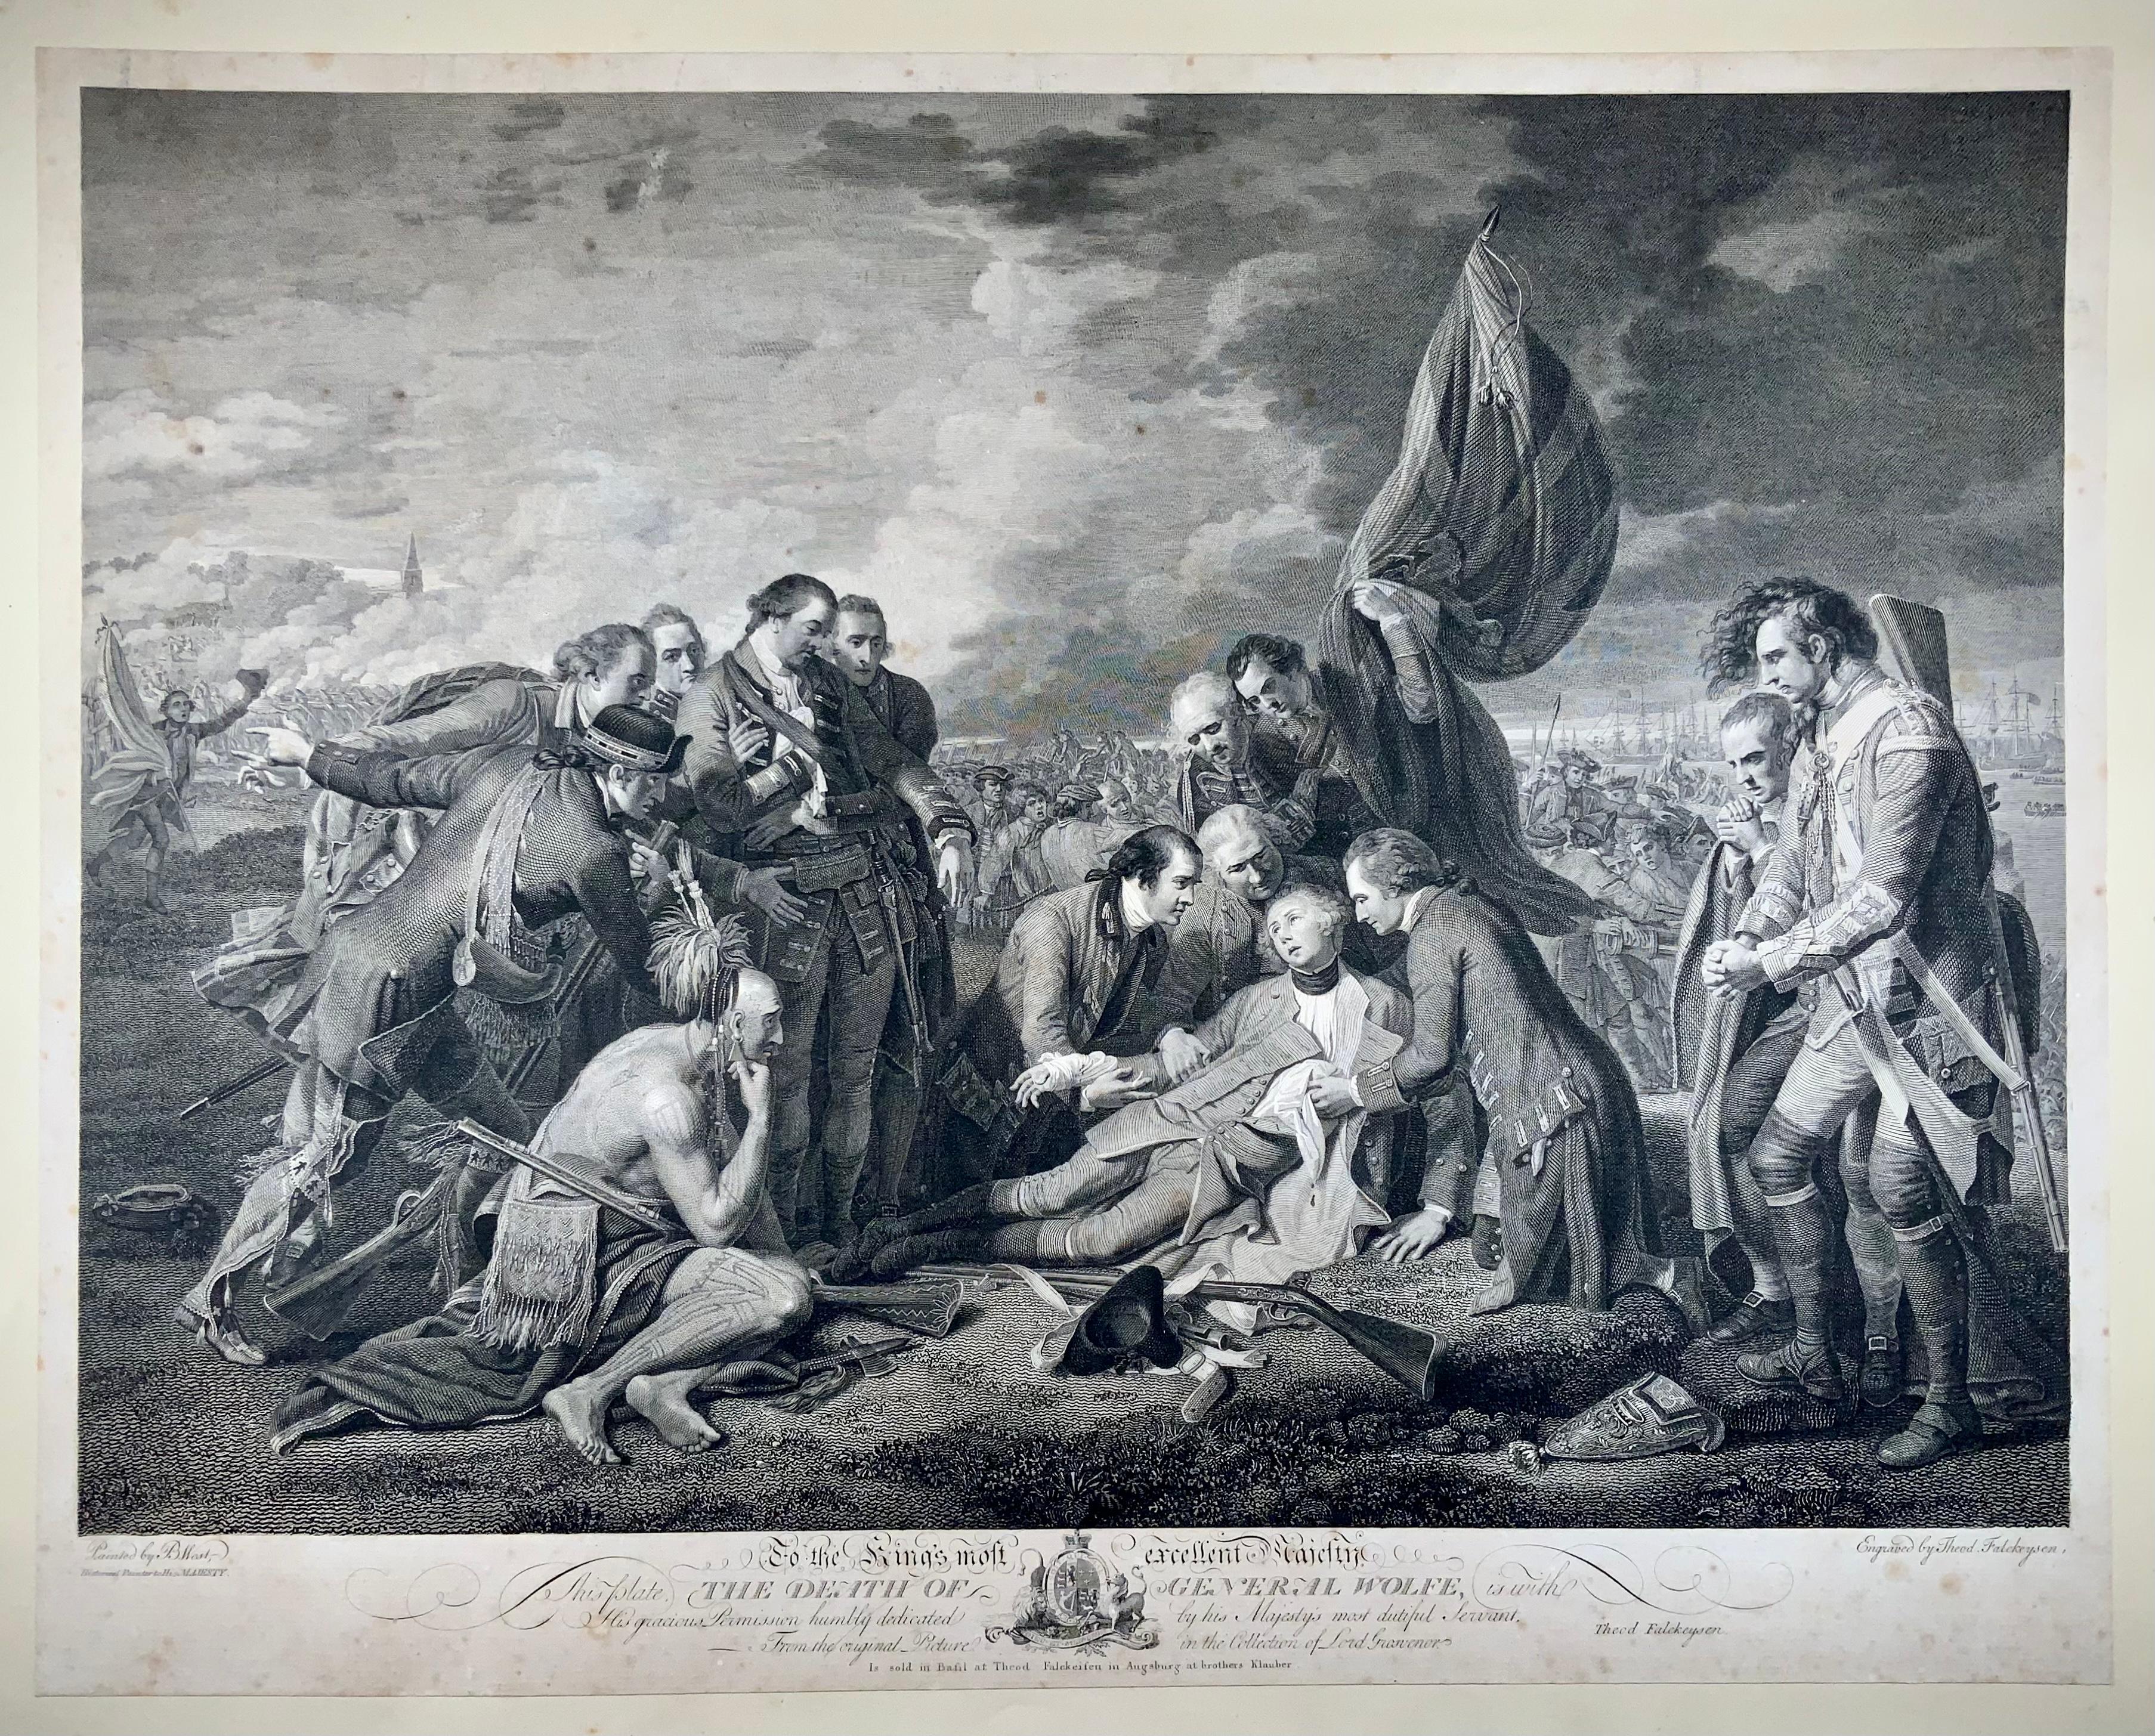 Etching on laid paper laid down on vellum, around 1789.

Etching after Benjamin West's 1770 painting 